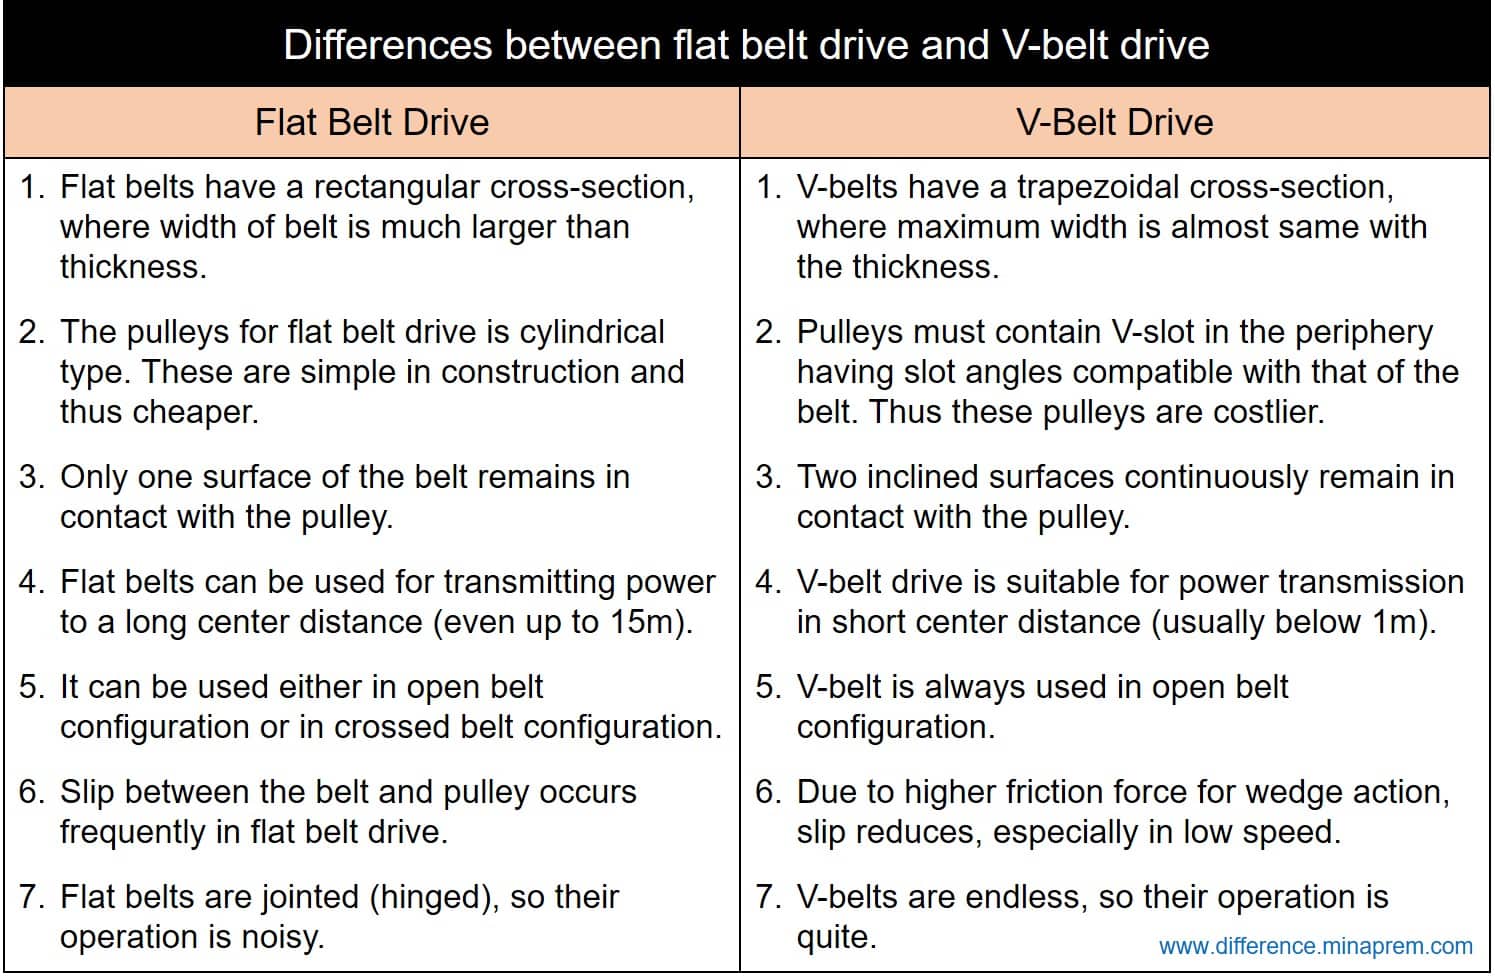 Difference Between Flat Belt Drive and VBelt Drive